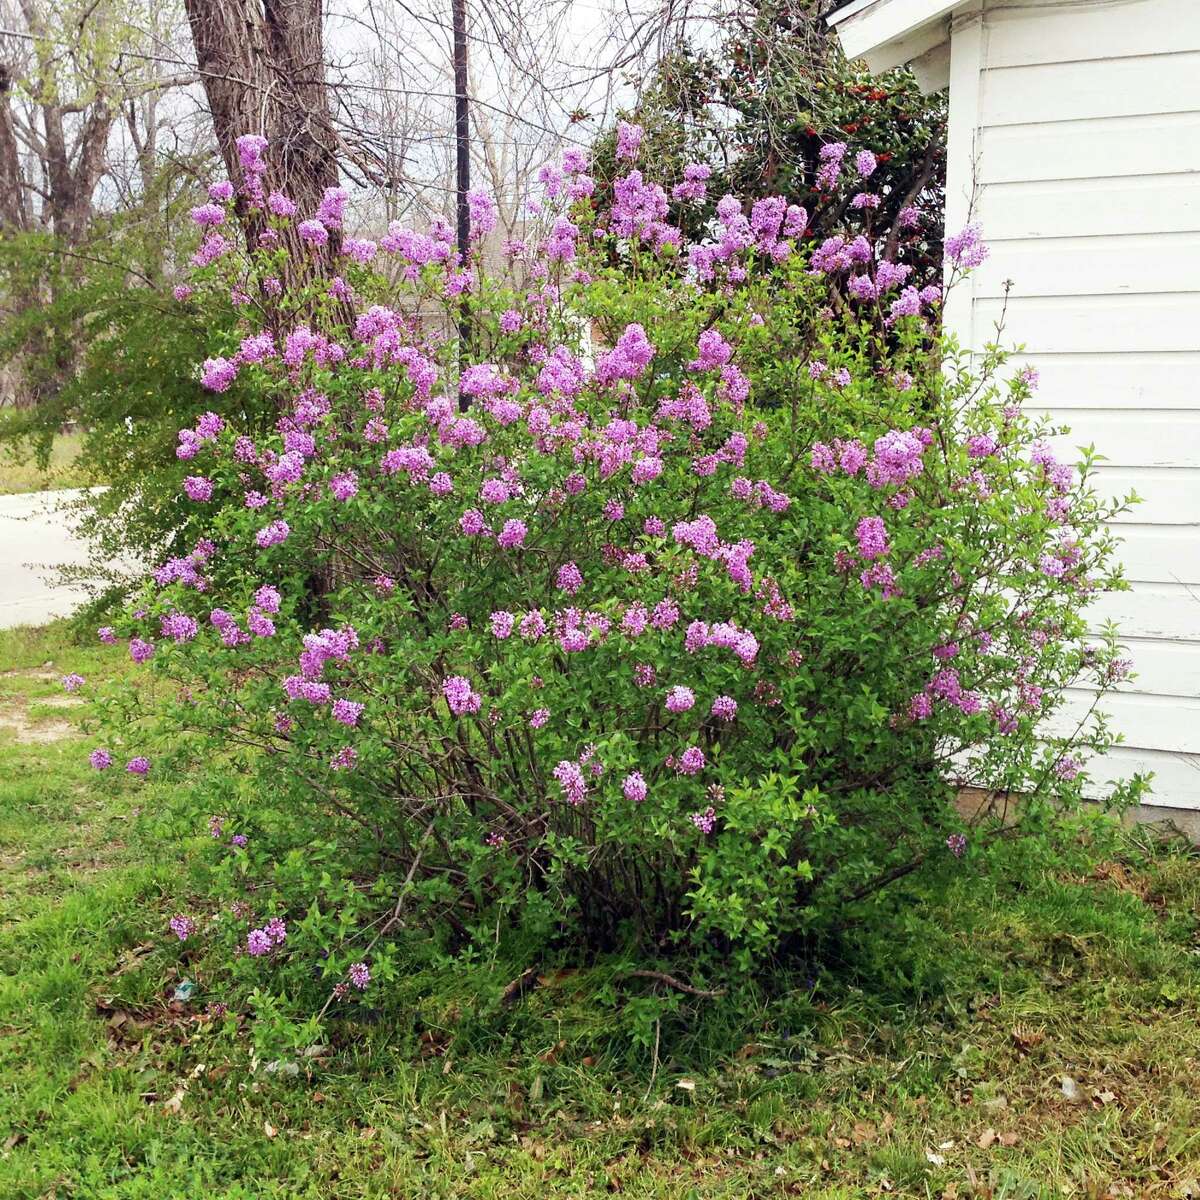 Lilacs grow in limited areas of Texas, usually in counties along the Red River. Those plants never thrive as they would in cooler climates.